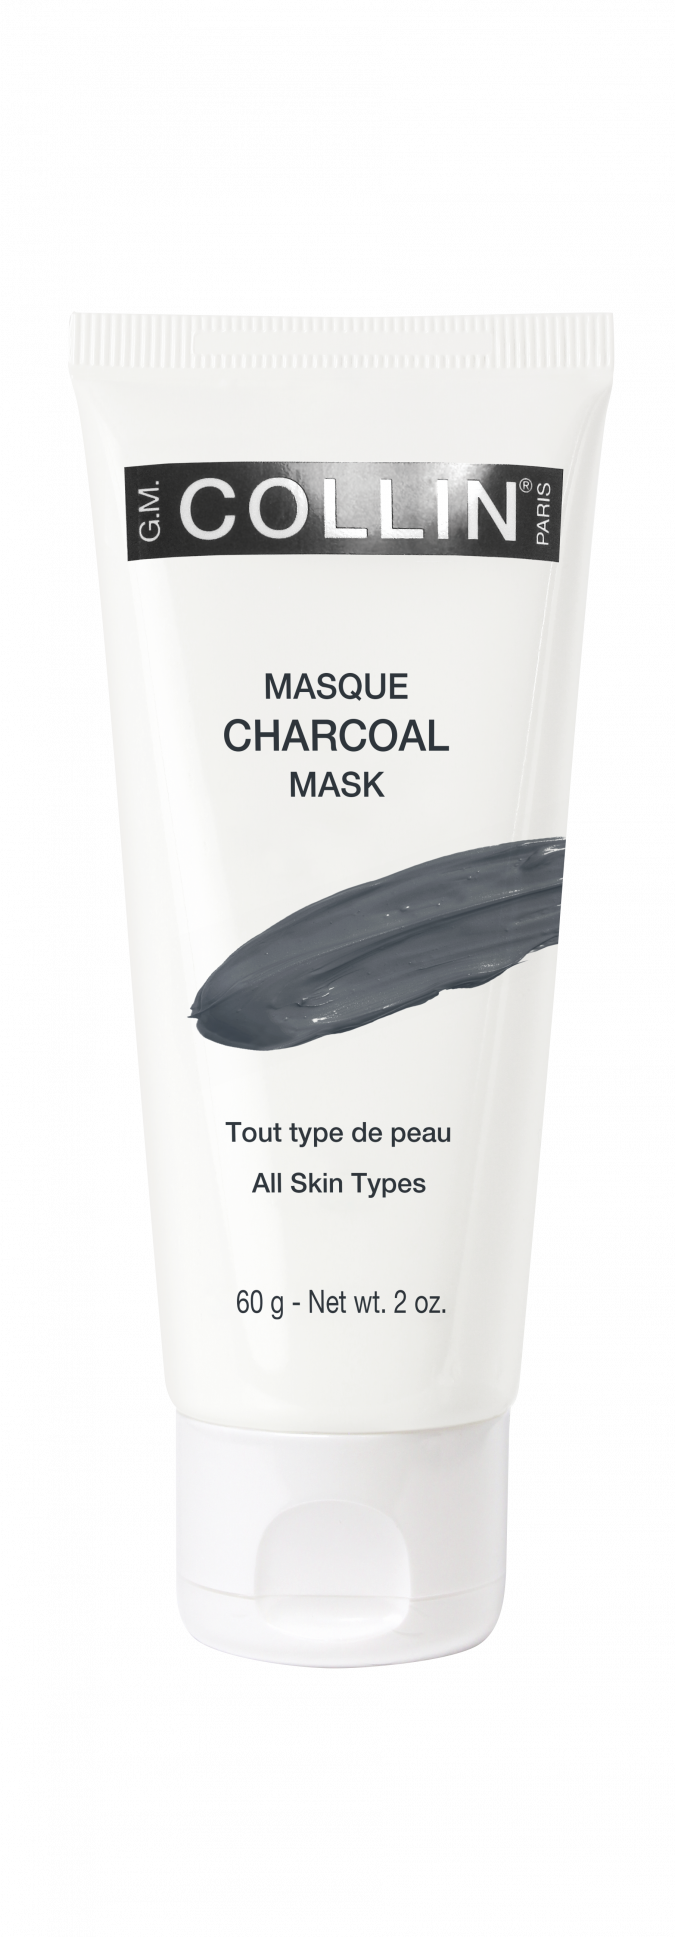 Masque Charcoal